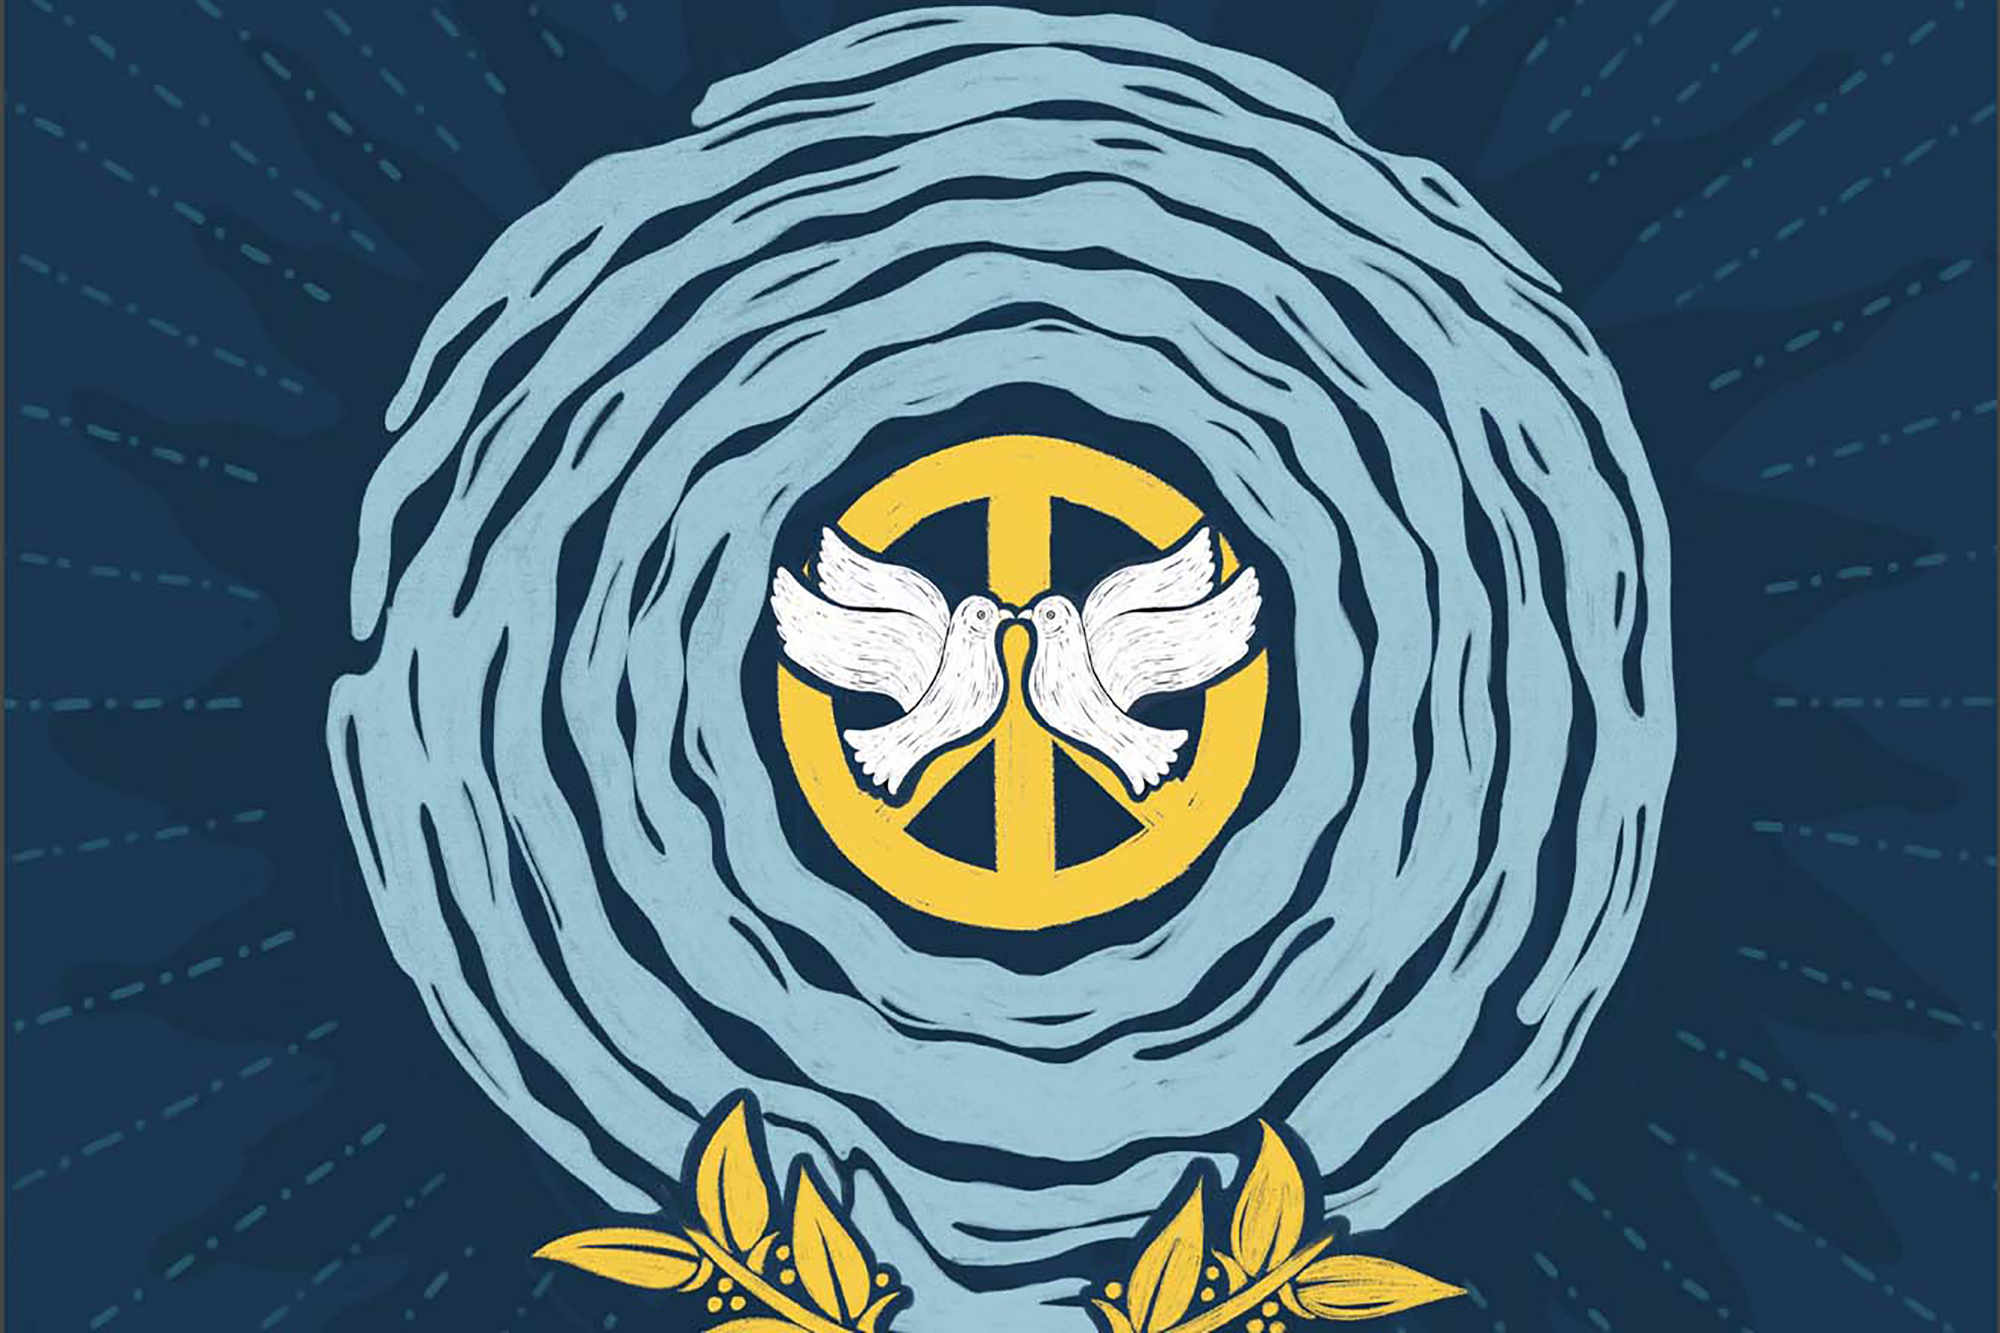 Illustration depicting water waves around a peace icon with two pigeons.